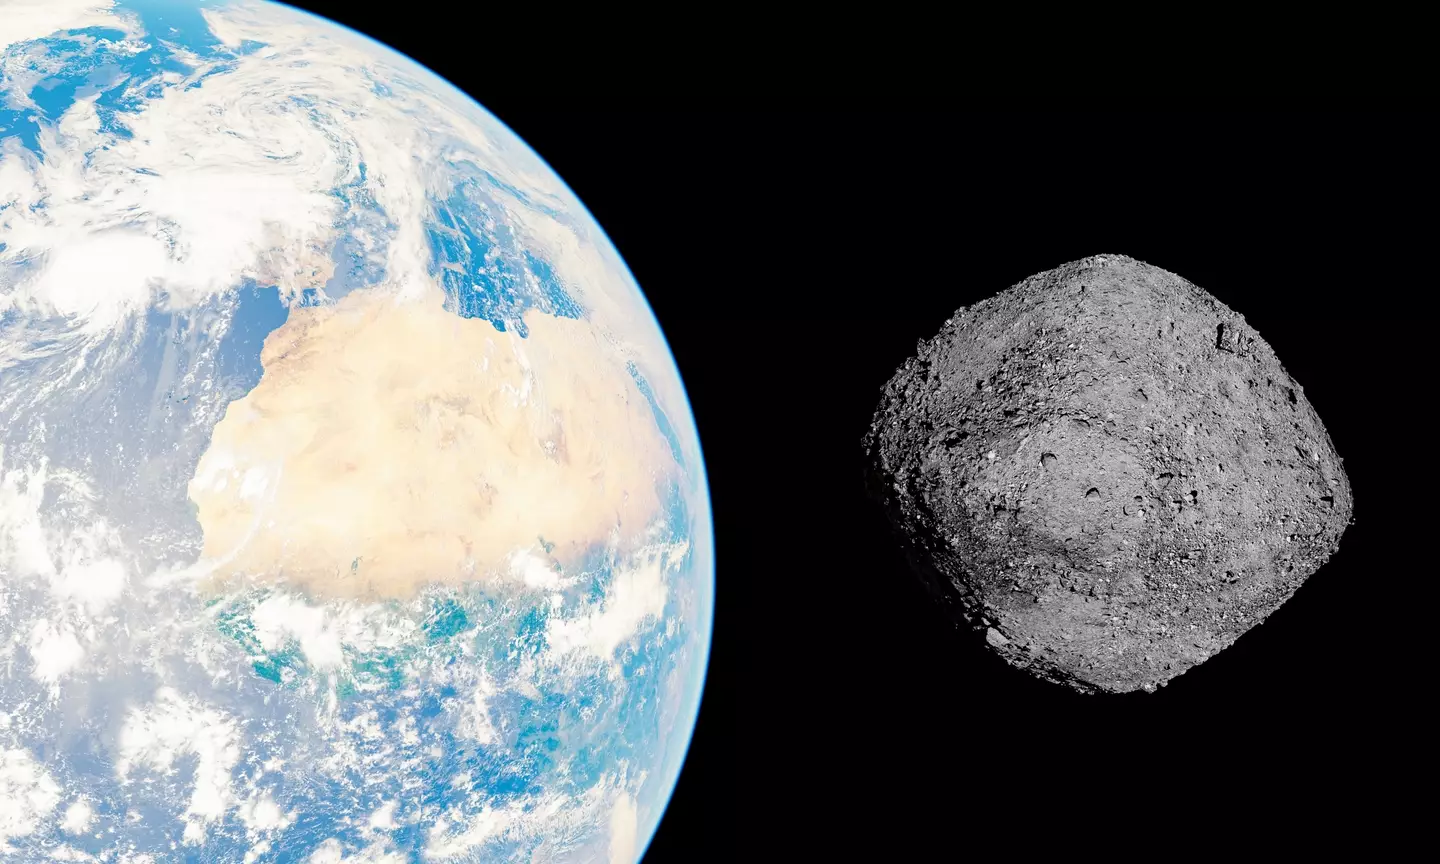 The asteroid Bennu passes Earth approximately every six years.